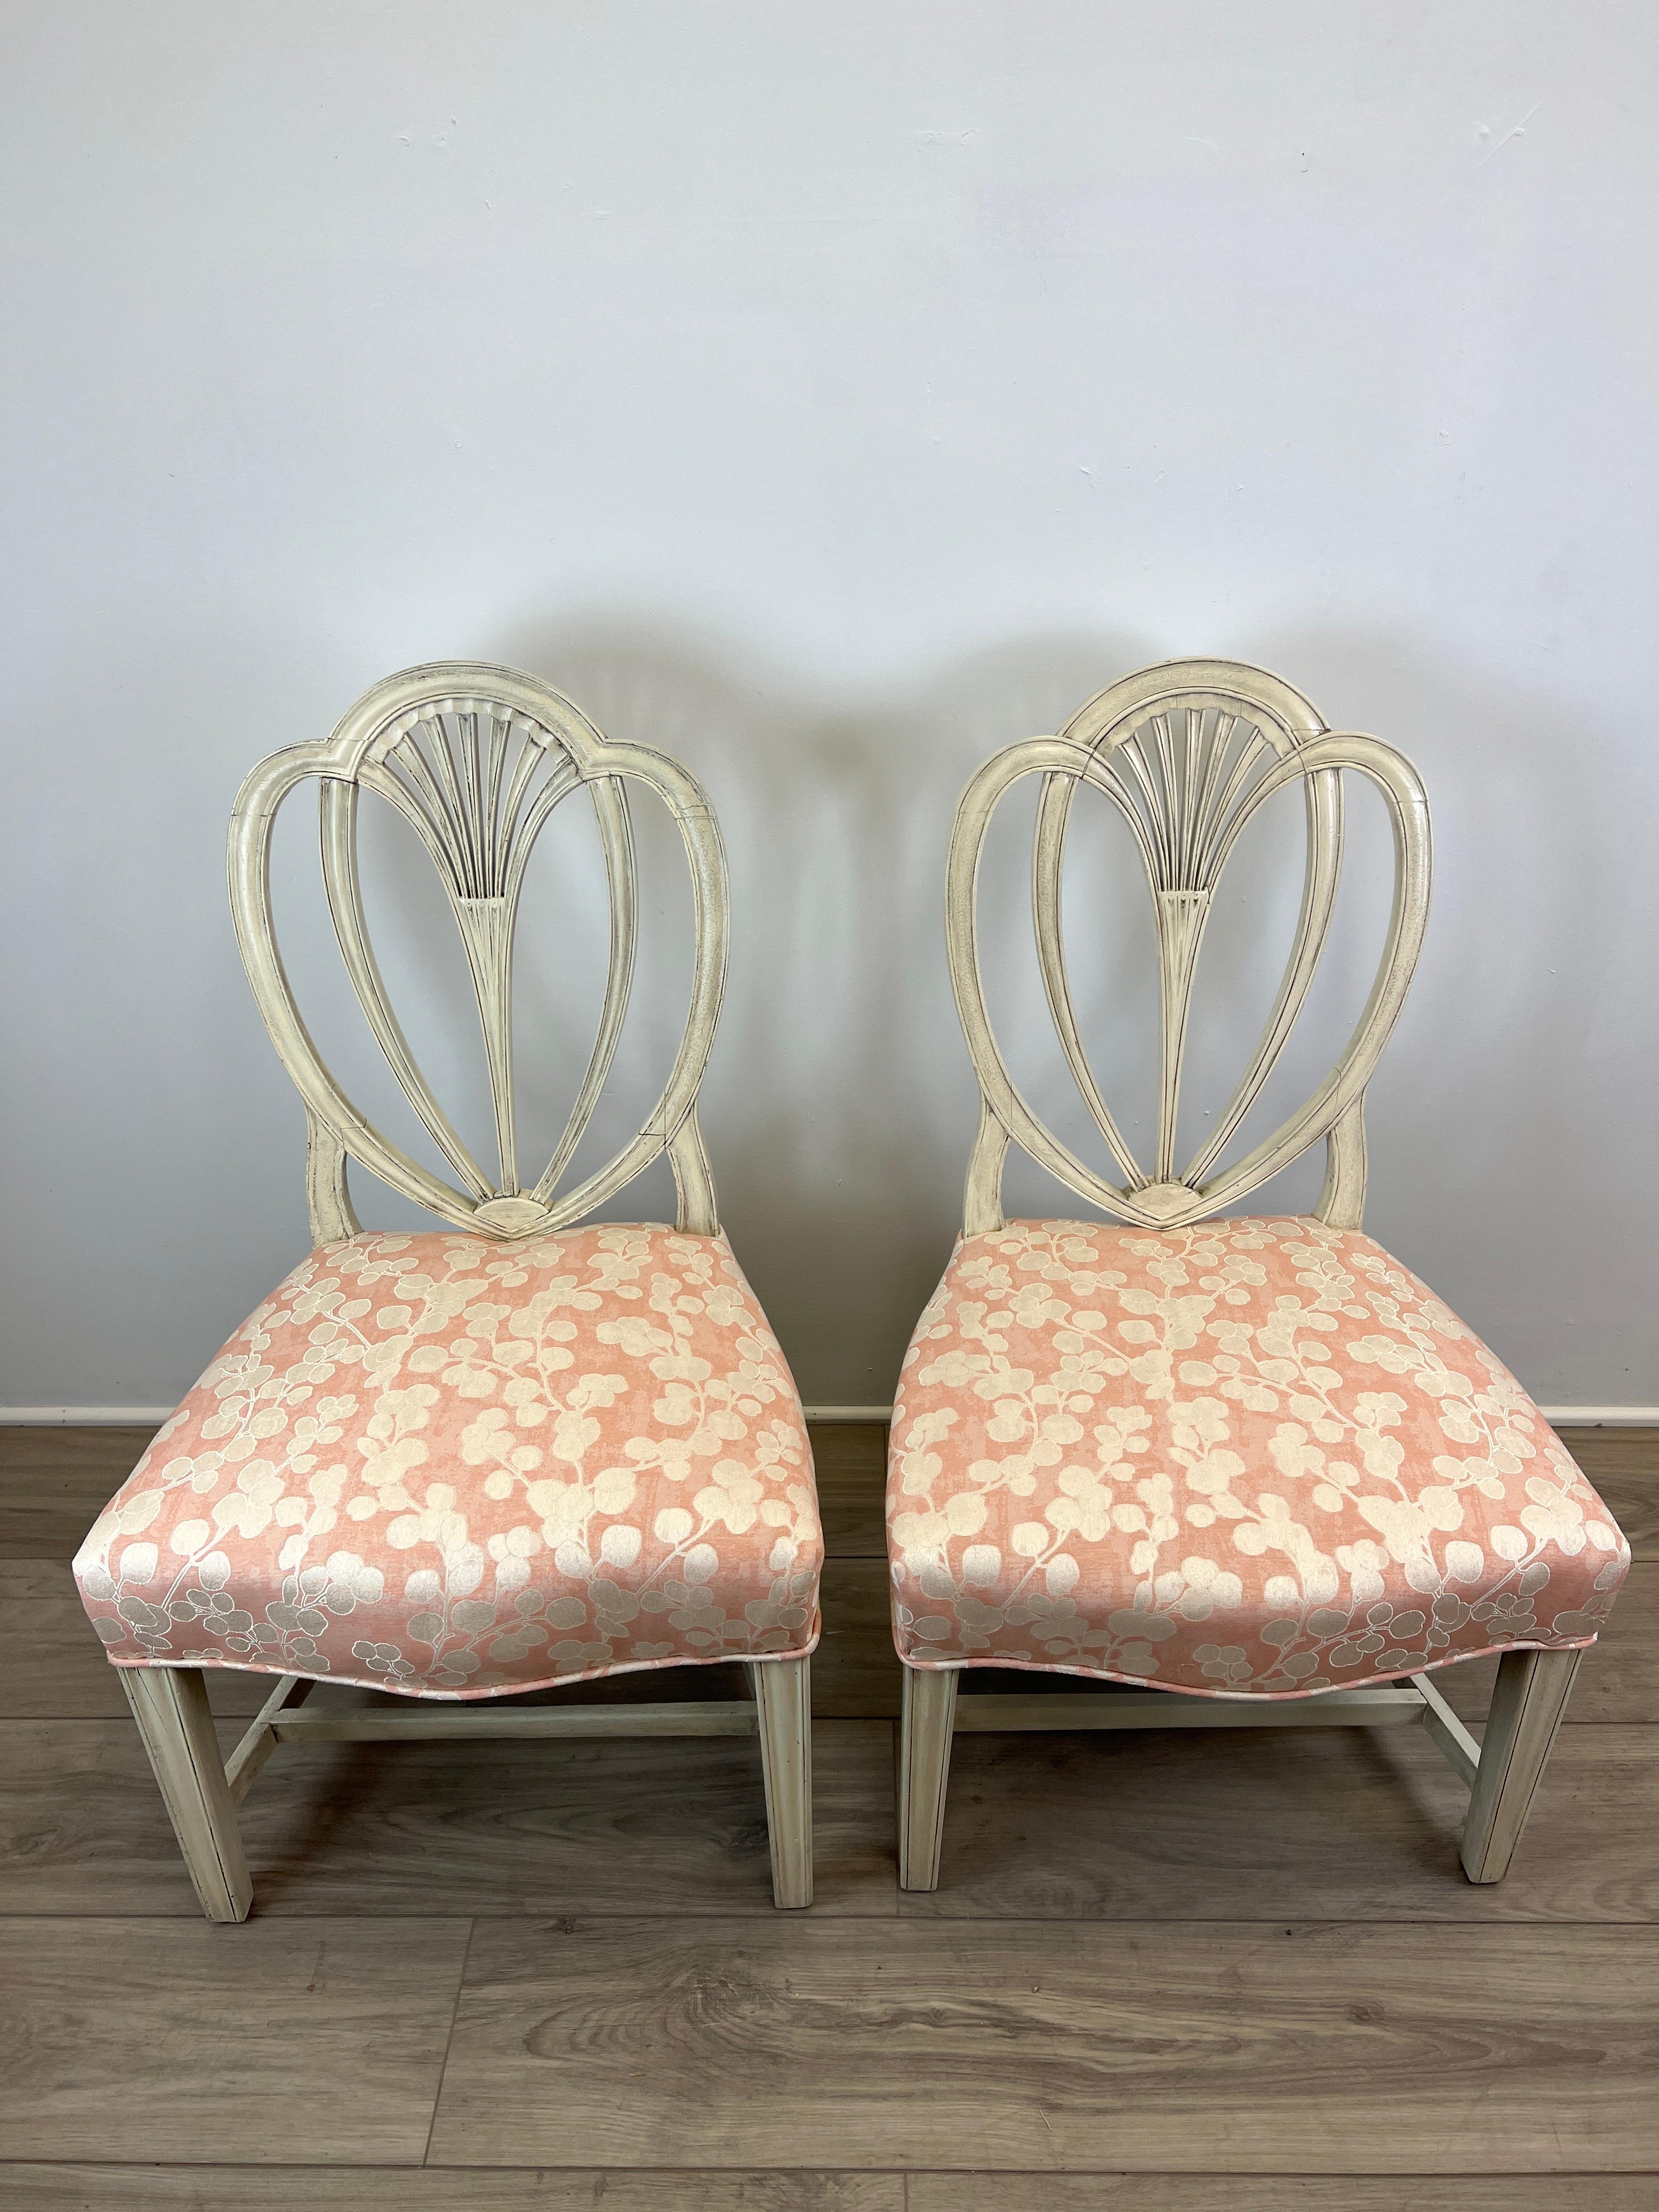 Painted Pair of 18th Century American Mid-Atlantic Hepplewhite Arched Back Side Chairs For Sale